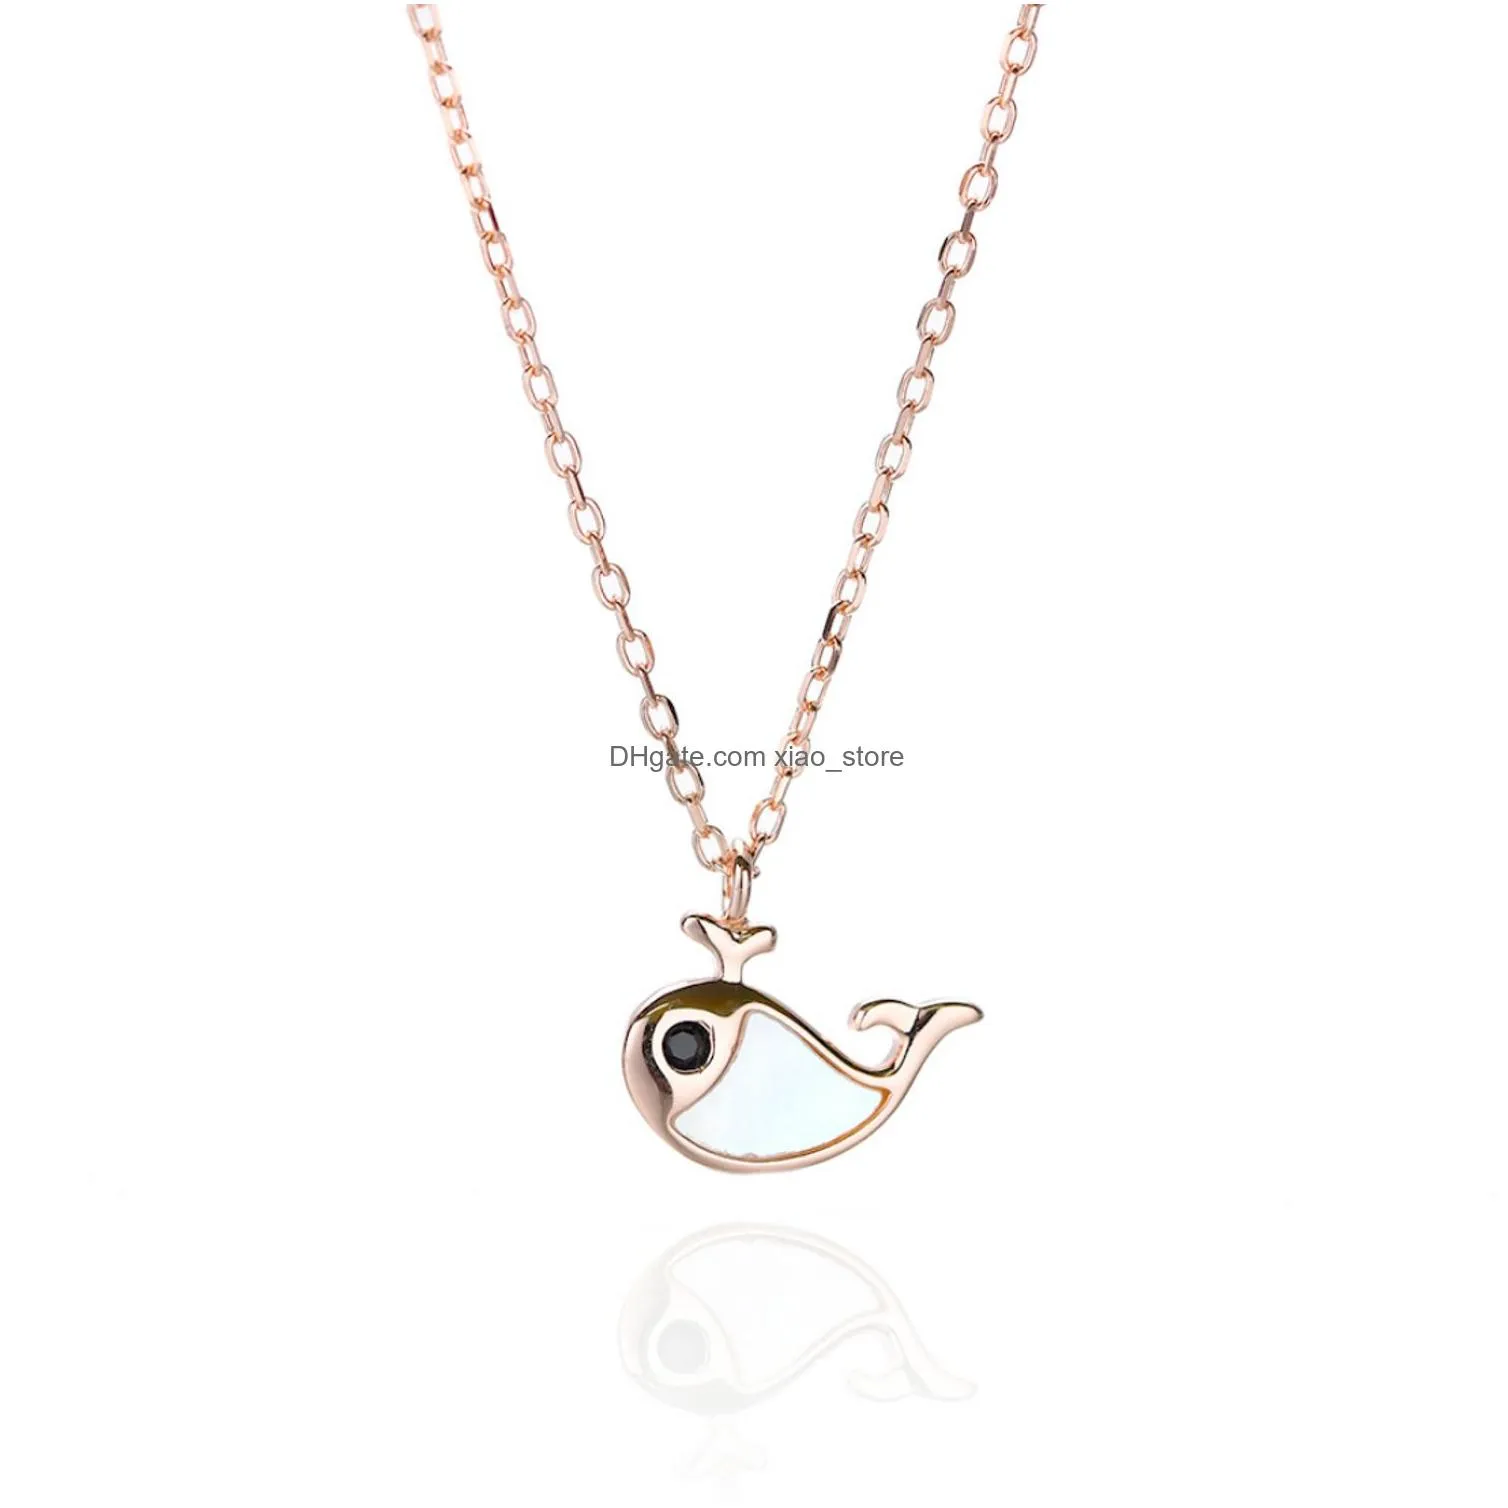 ocean necklace s925 sterling silver simple temperament fashion shell cute whale clavicle chain female accessories q0531